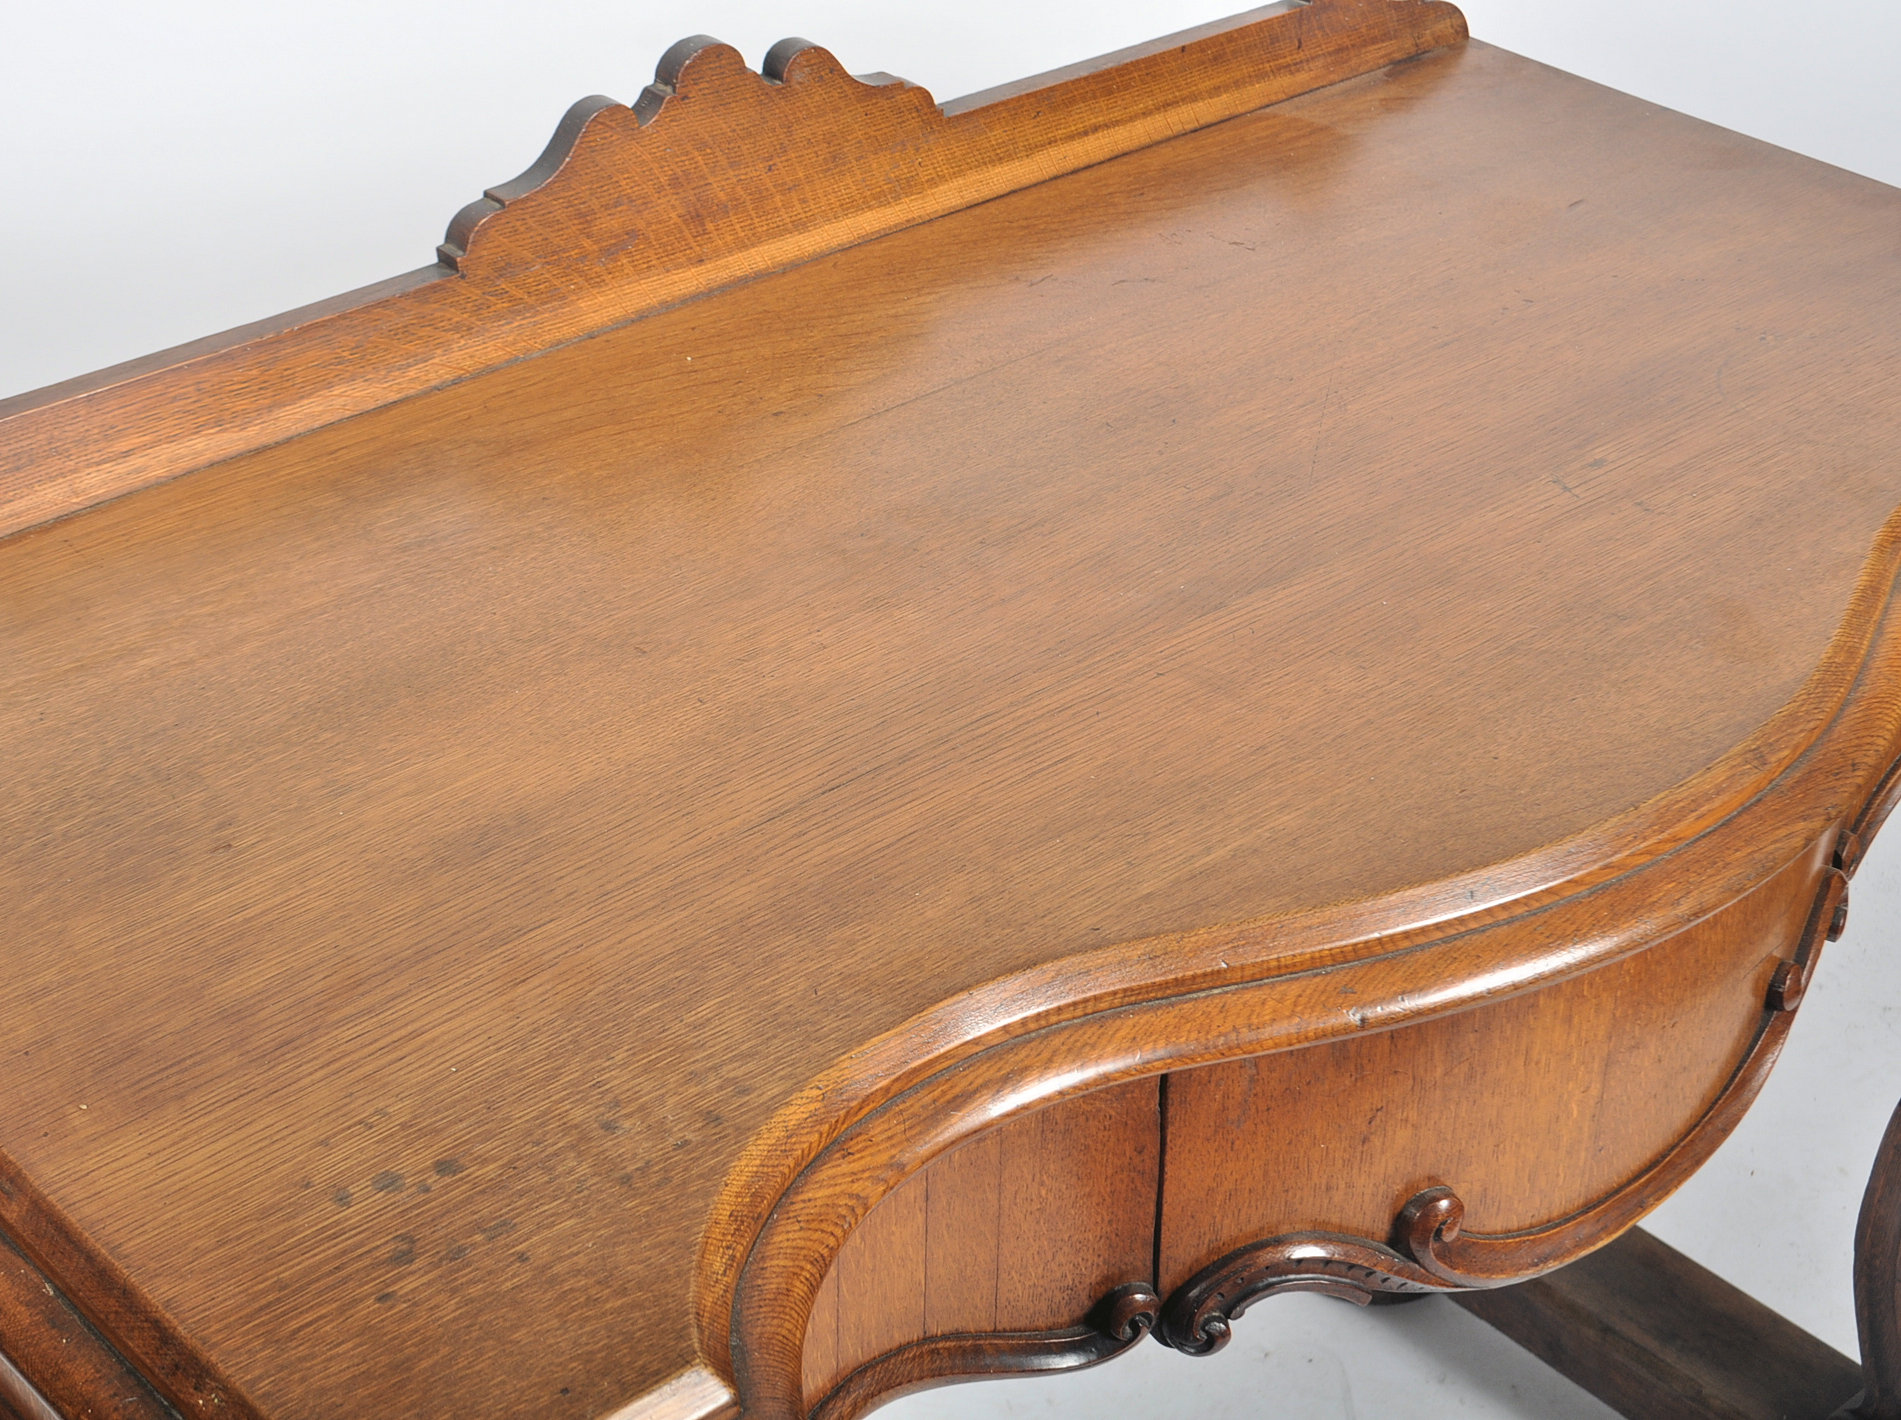 HIGH VICTORIAN 19TH CENTURY OAK SERPENTINE CONSOLE TABLE - Image 2 of 5